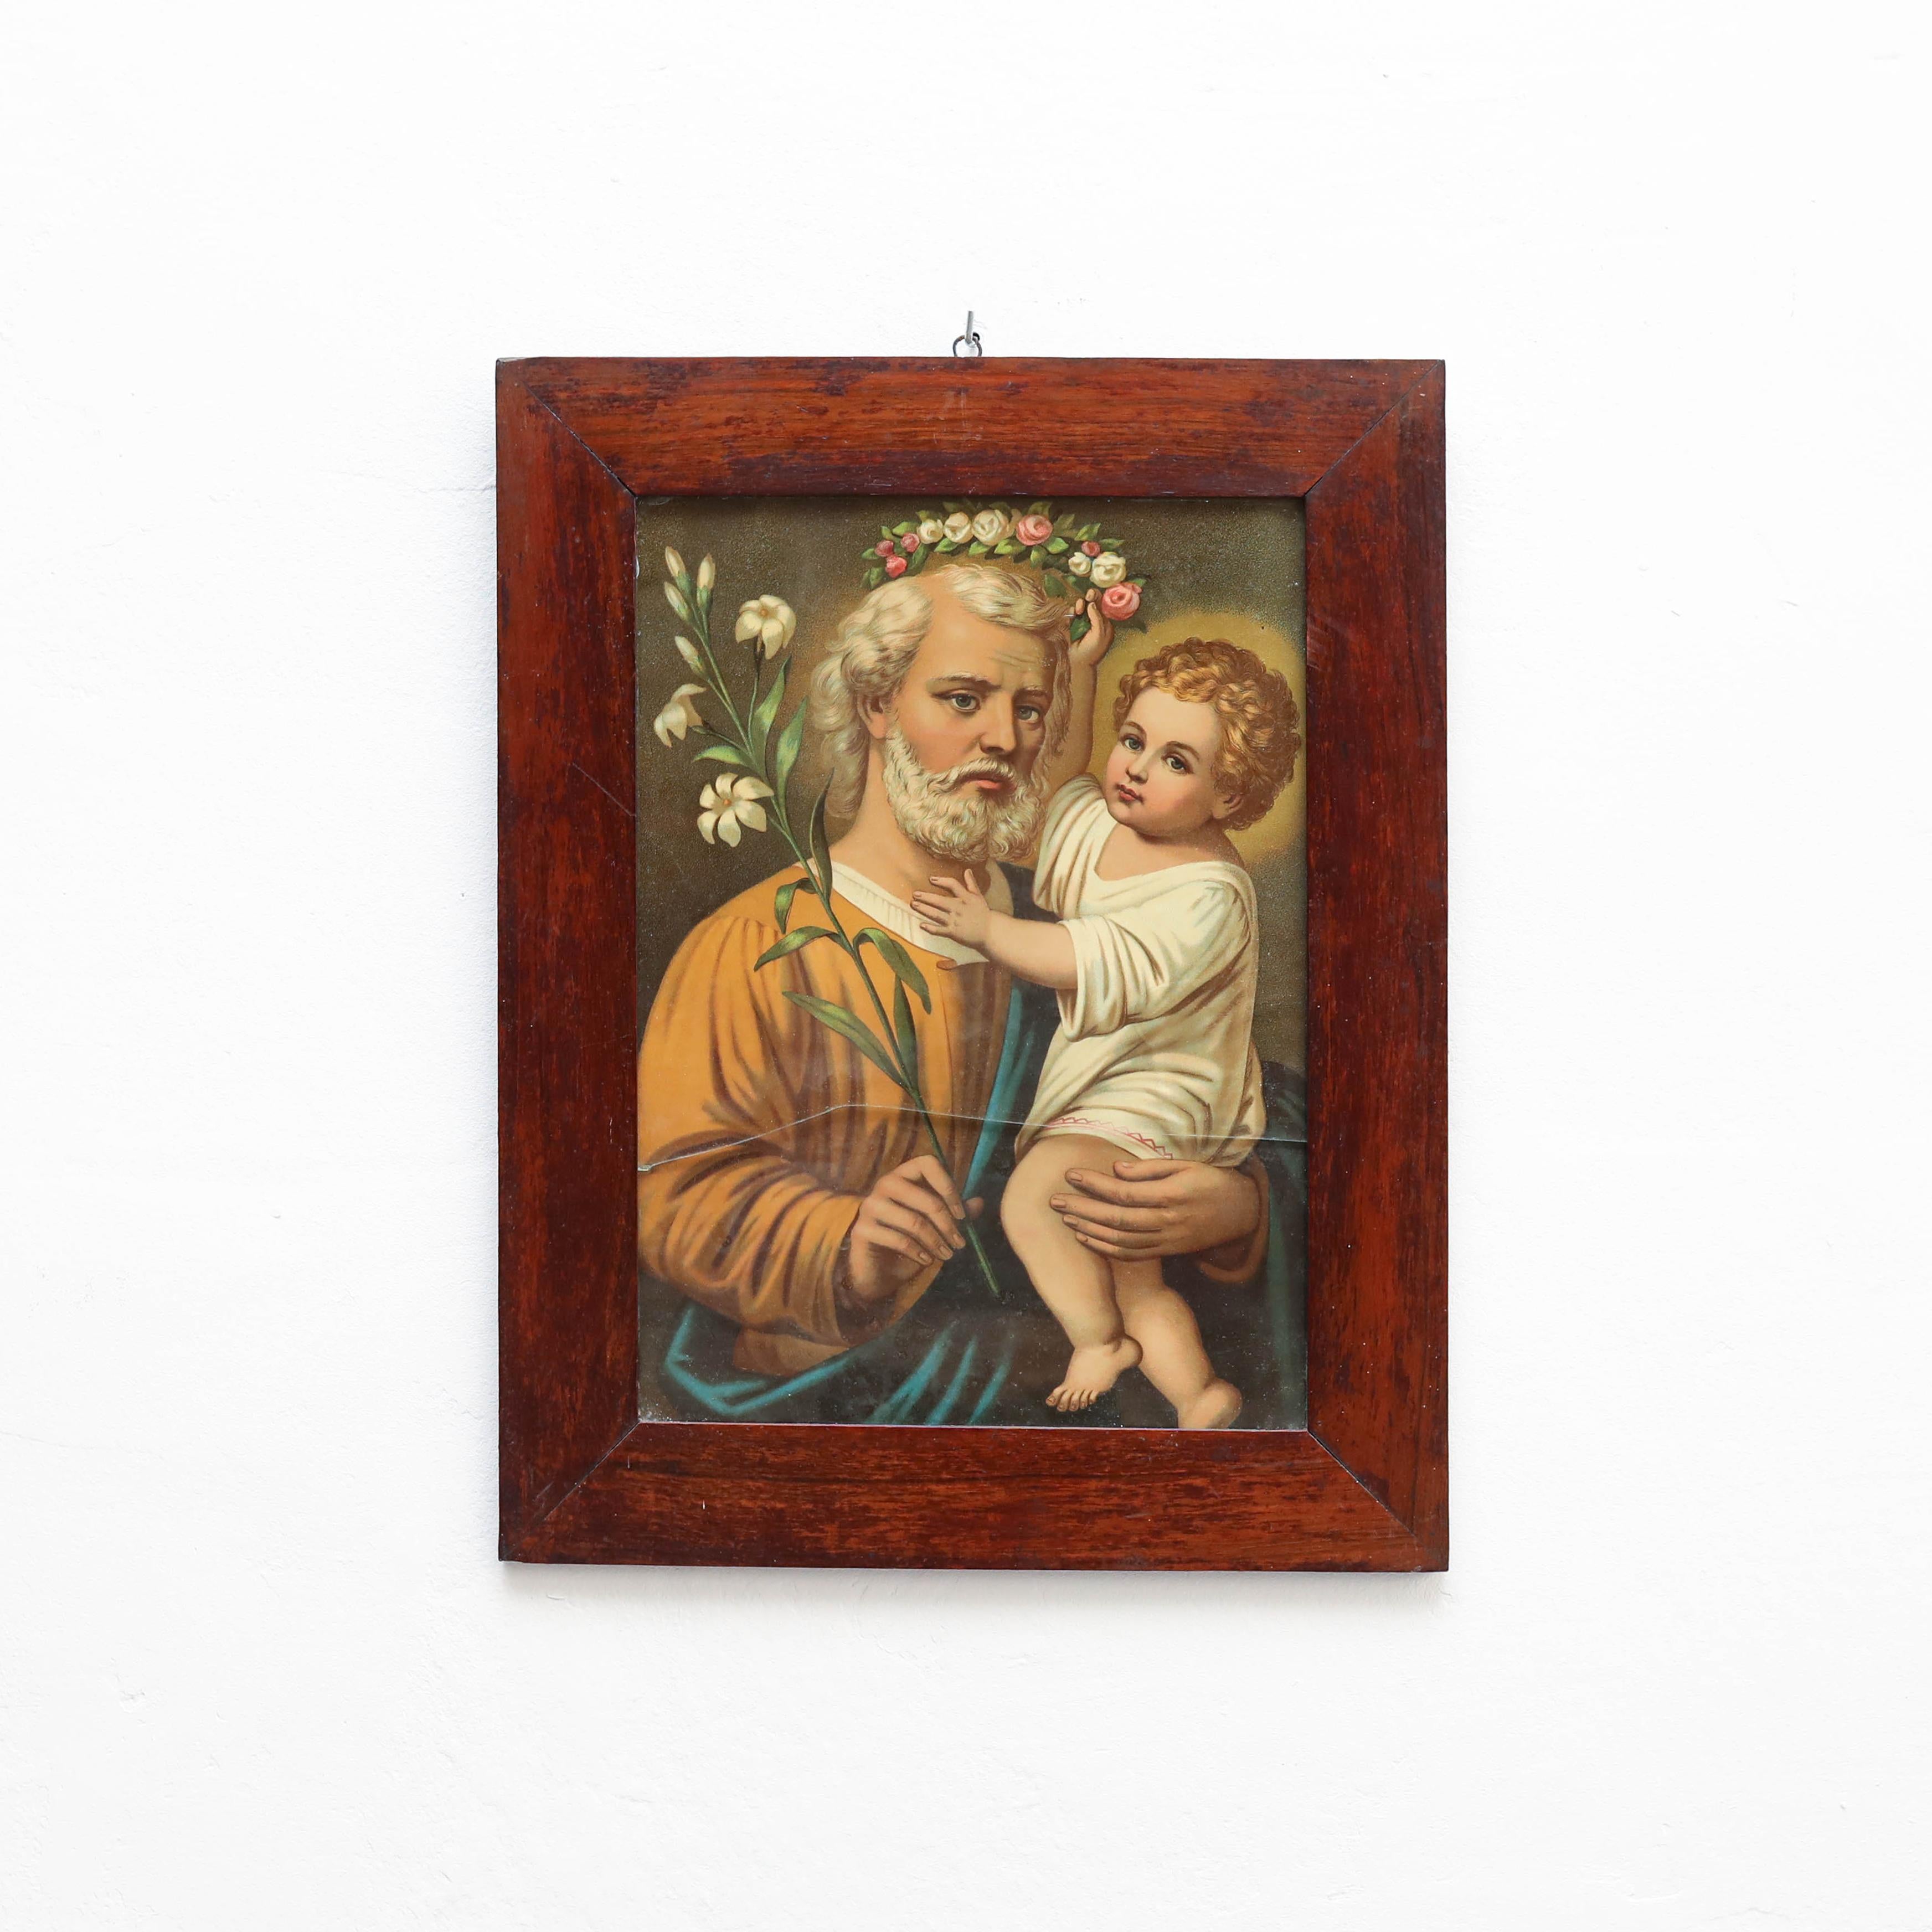 Framed print of Saint and Child.

By unknown artist, circa 1940.

In original condition, with some visible signs of previous use and age, preserving a beautiful patina.

